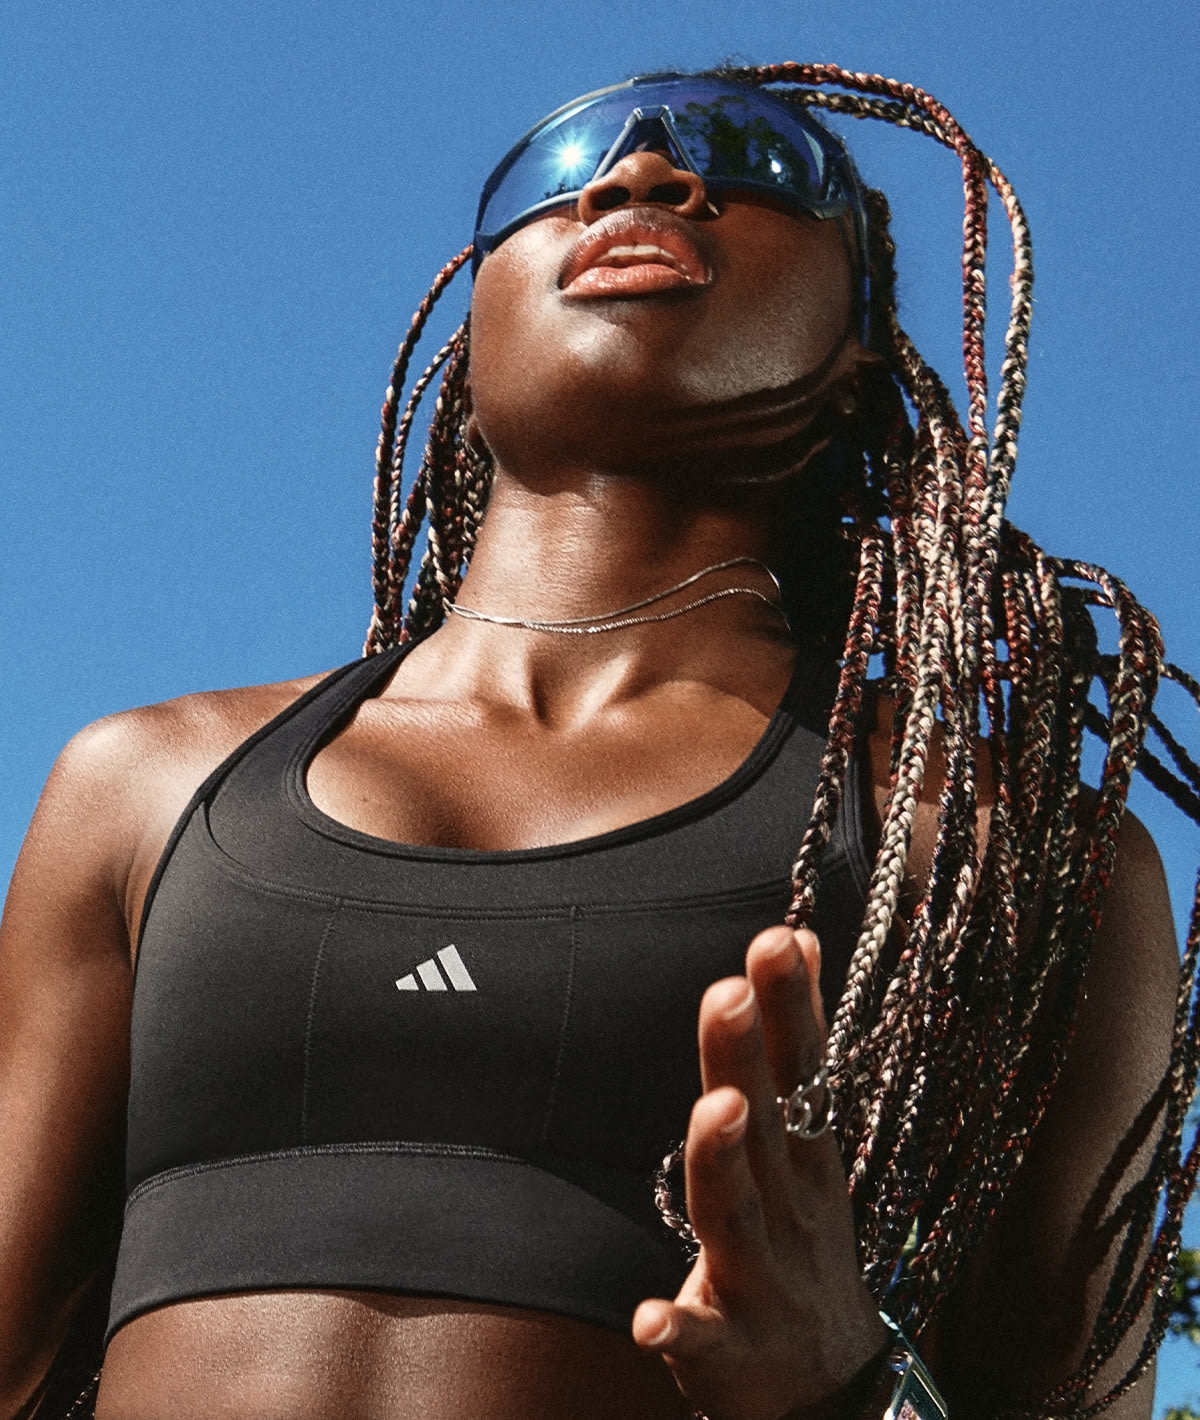 Support for every sport. New sports bras wear for all have arrived